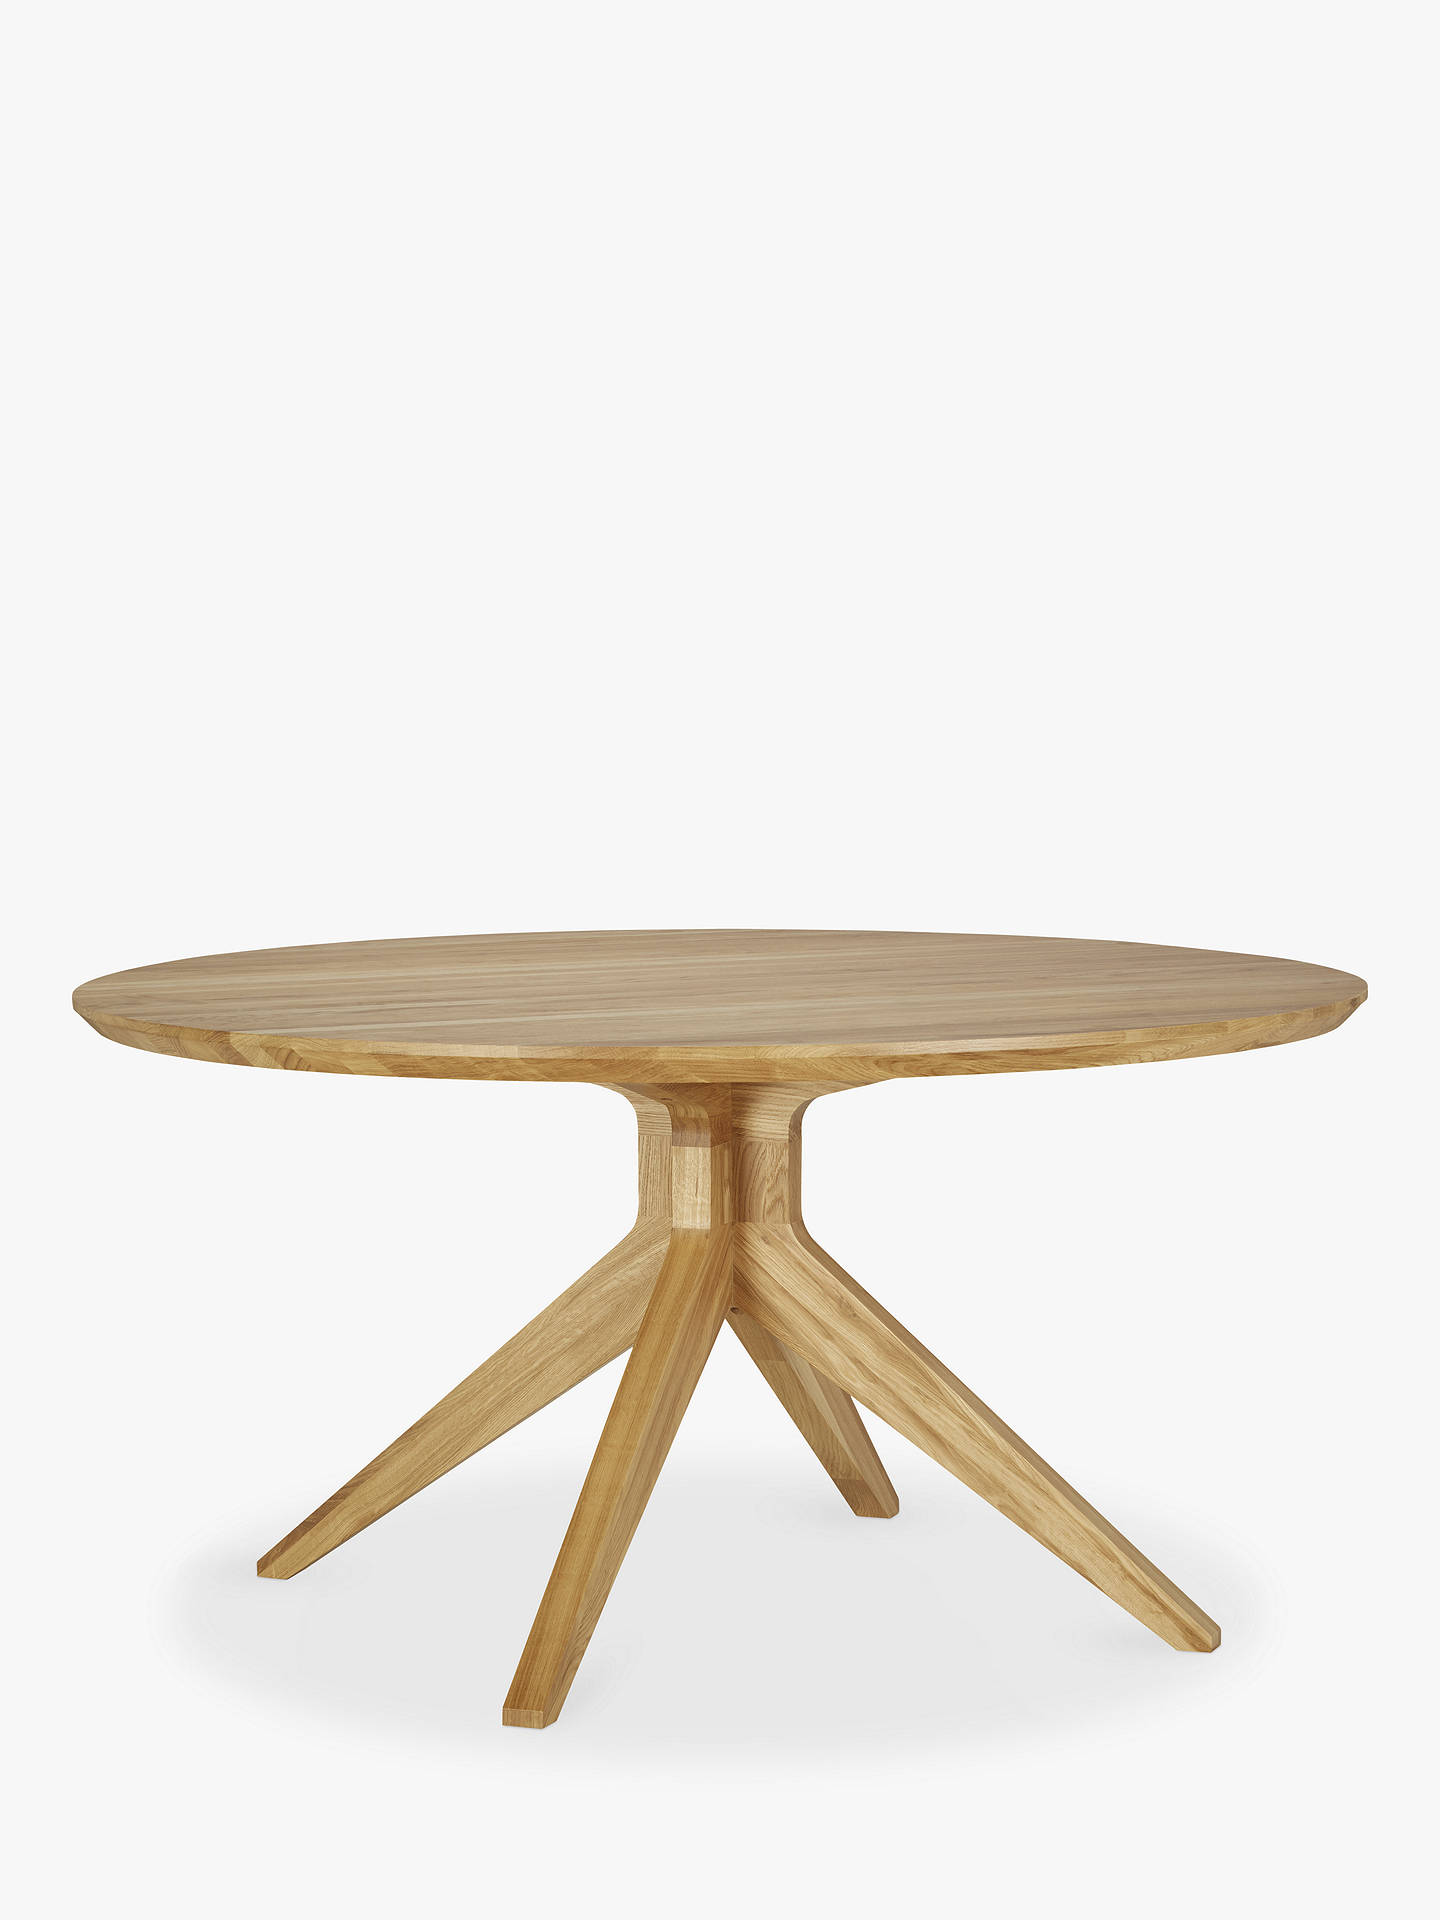 Matthew Hilton For Case Cross 6 Seater Round Dining Table Oak At John Lewis Partners